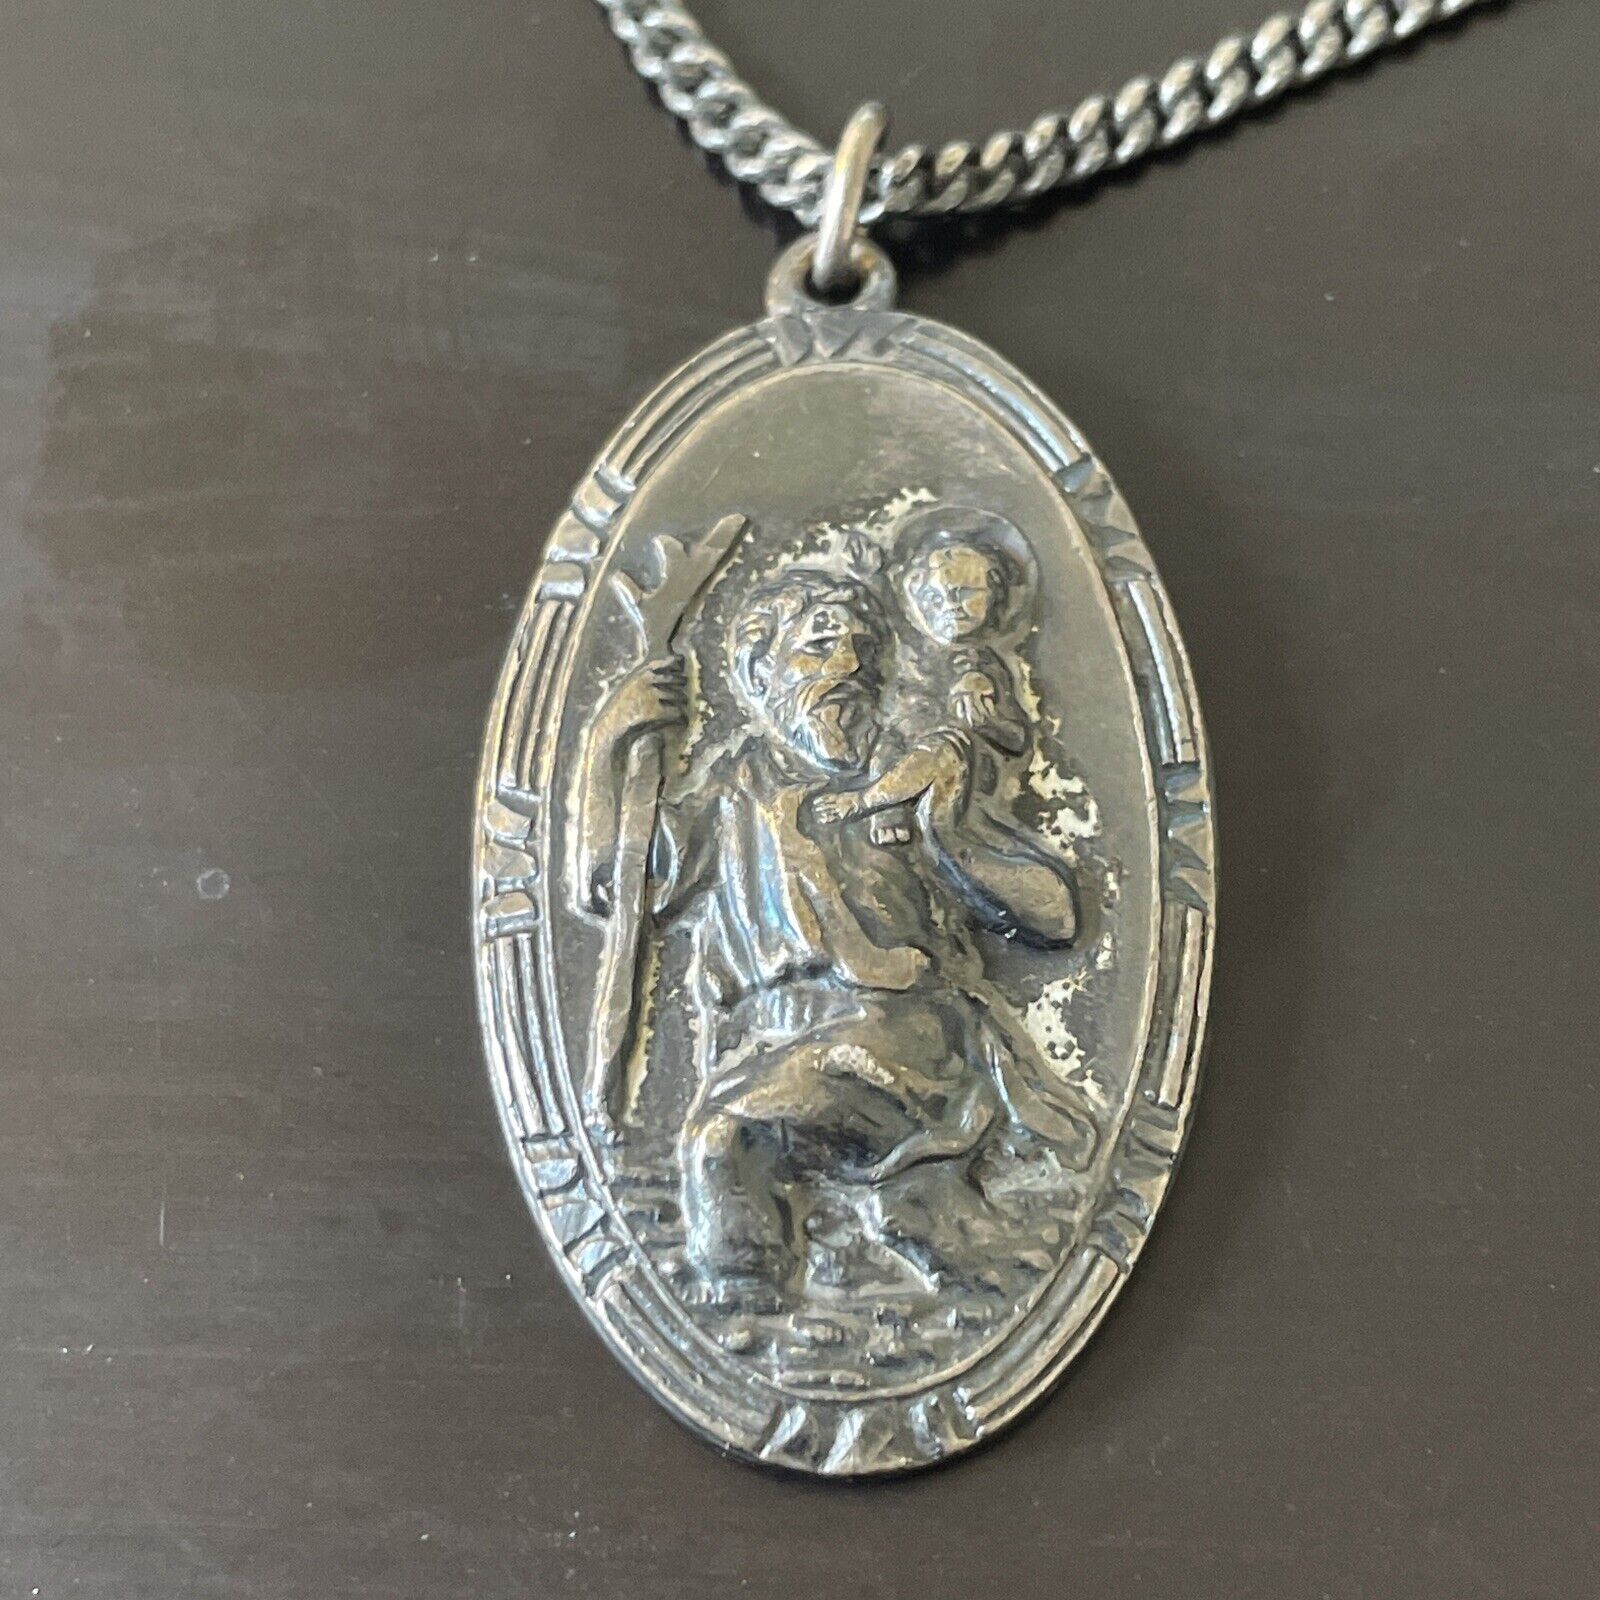 A. GALE INC. Antique STERLING SILVER ST. CHRISTOPHER PENDANT 17.9 gm 24” Chain